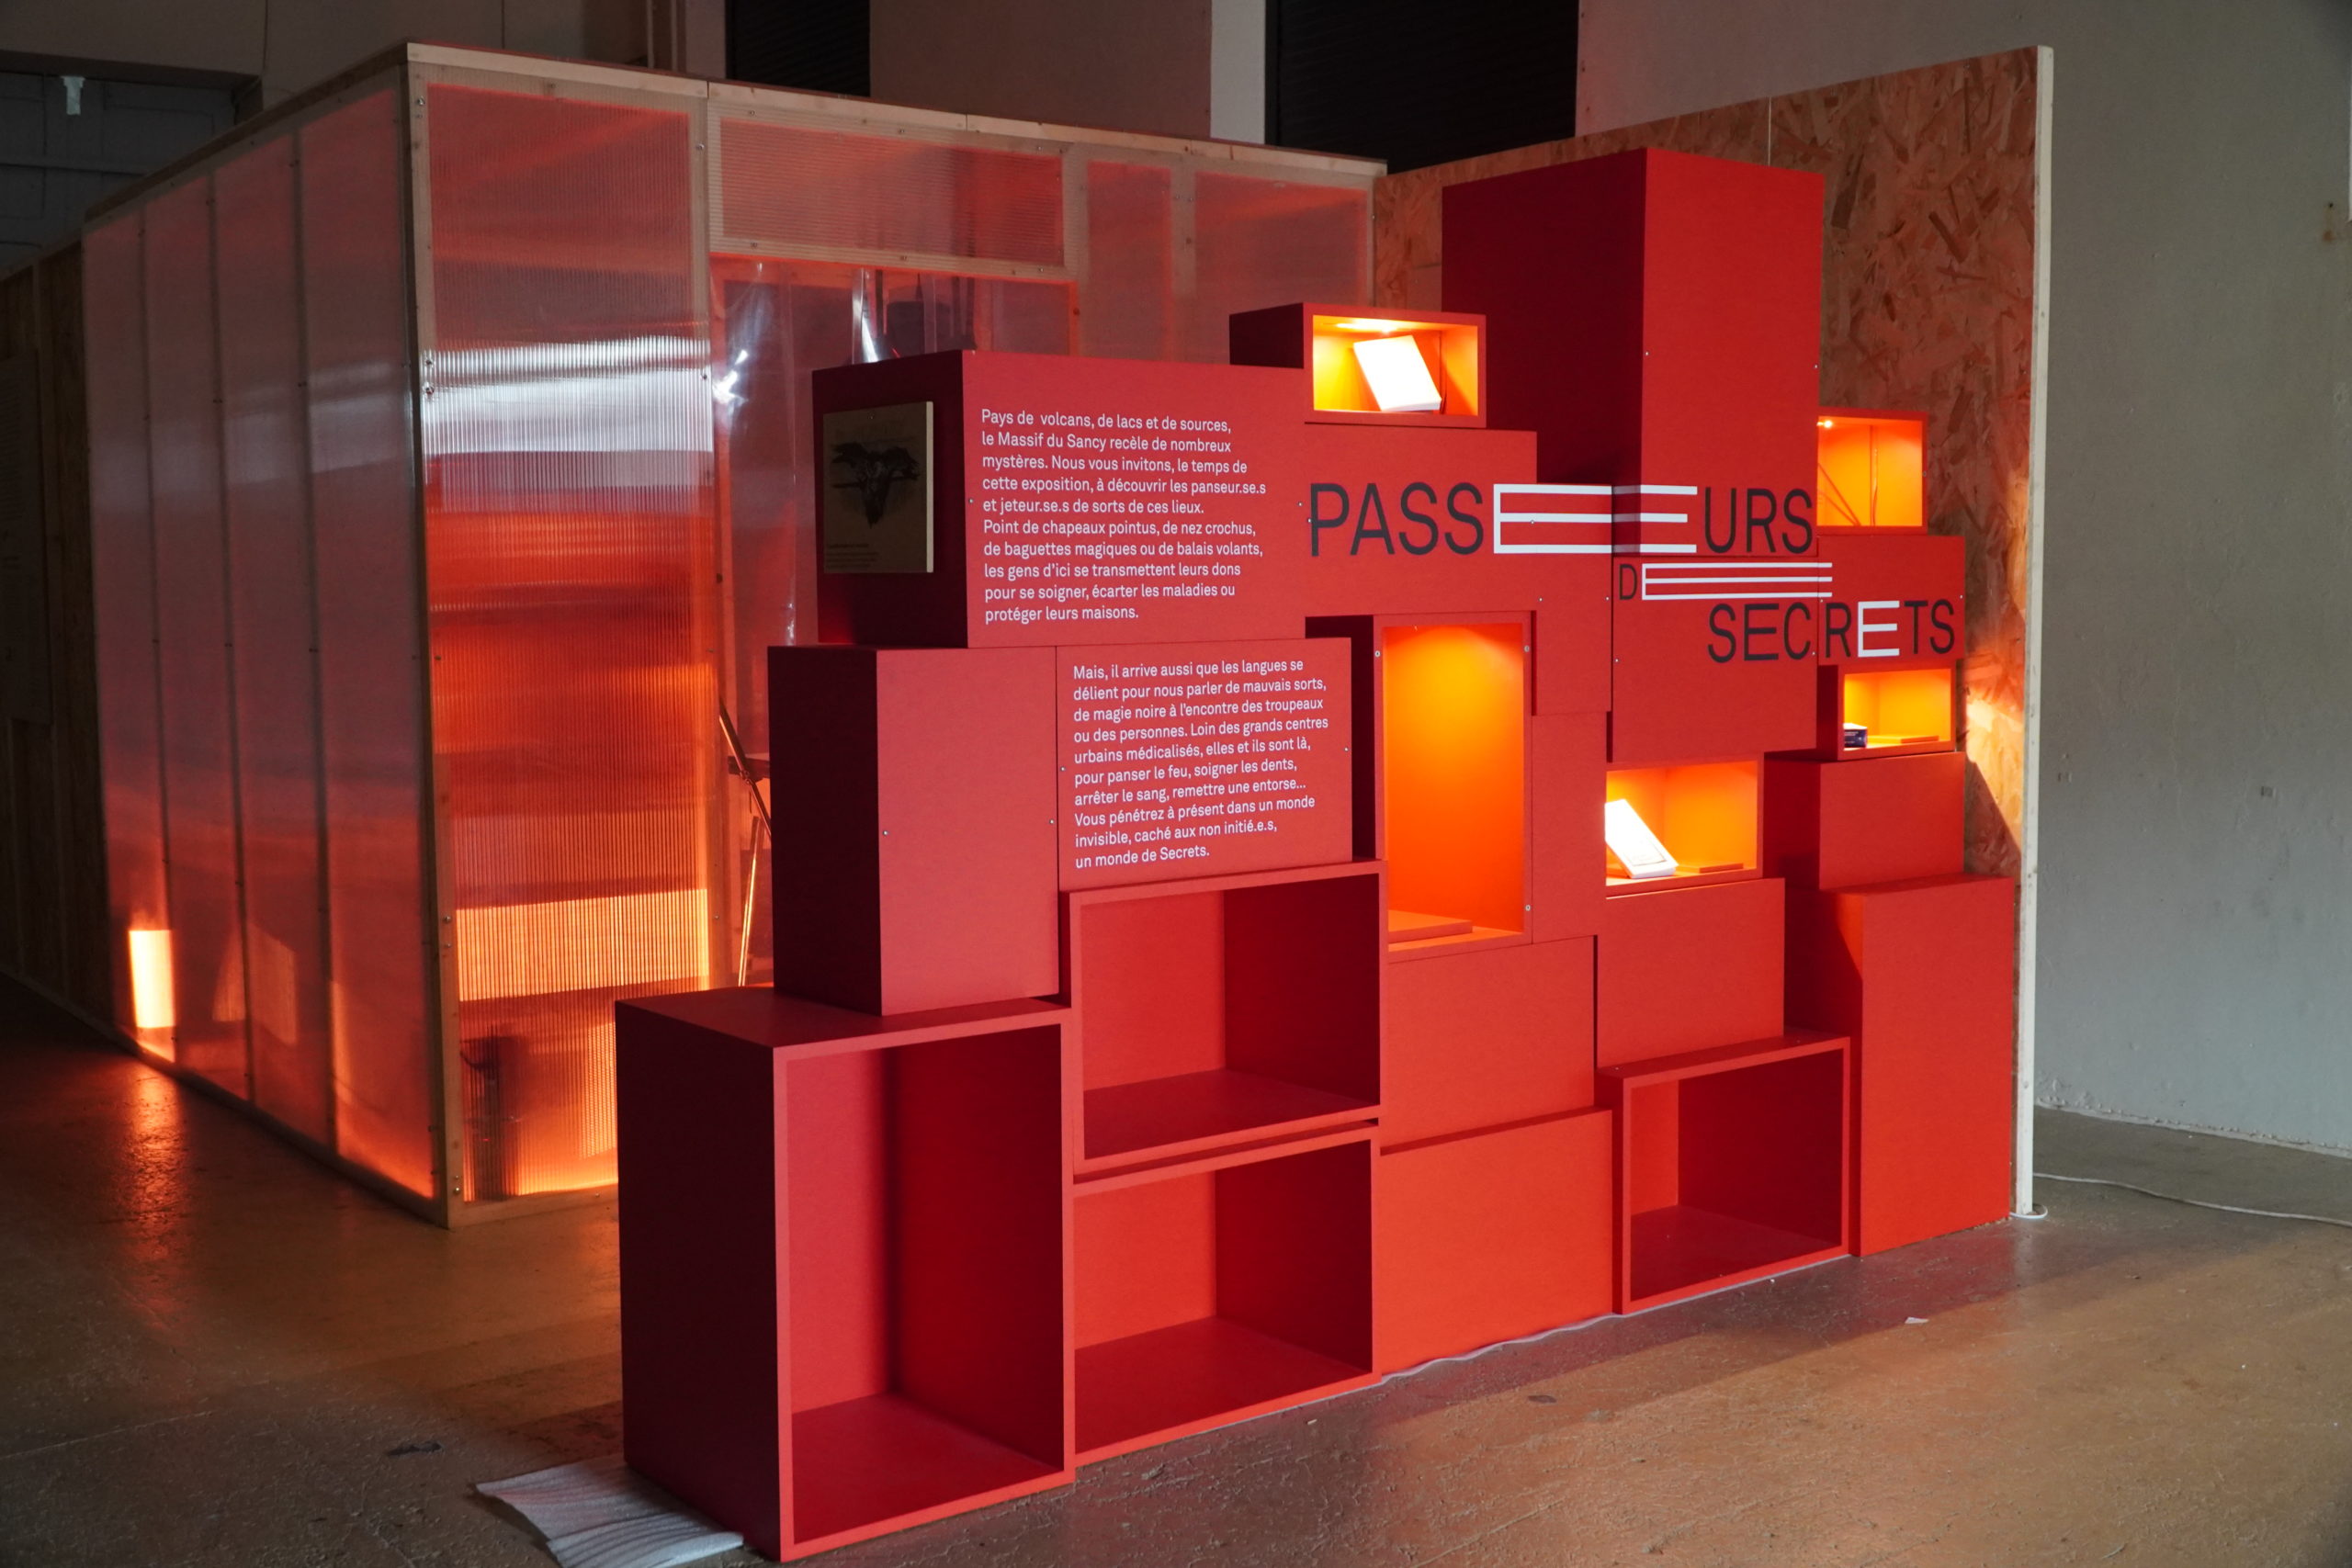 You are currently viewing Exposition « Passeurs de secrets »